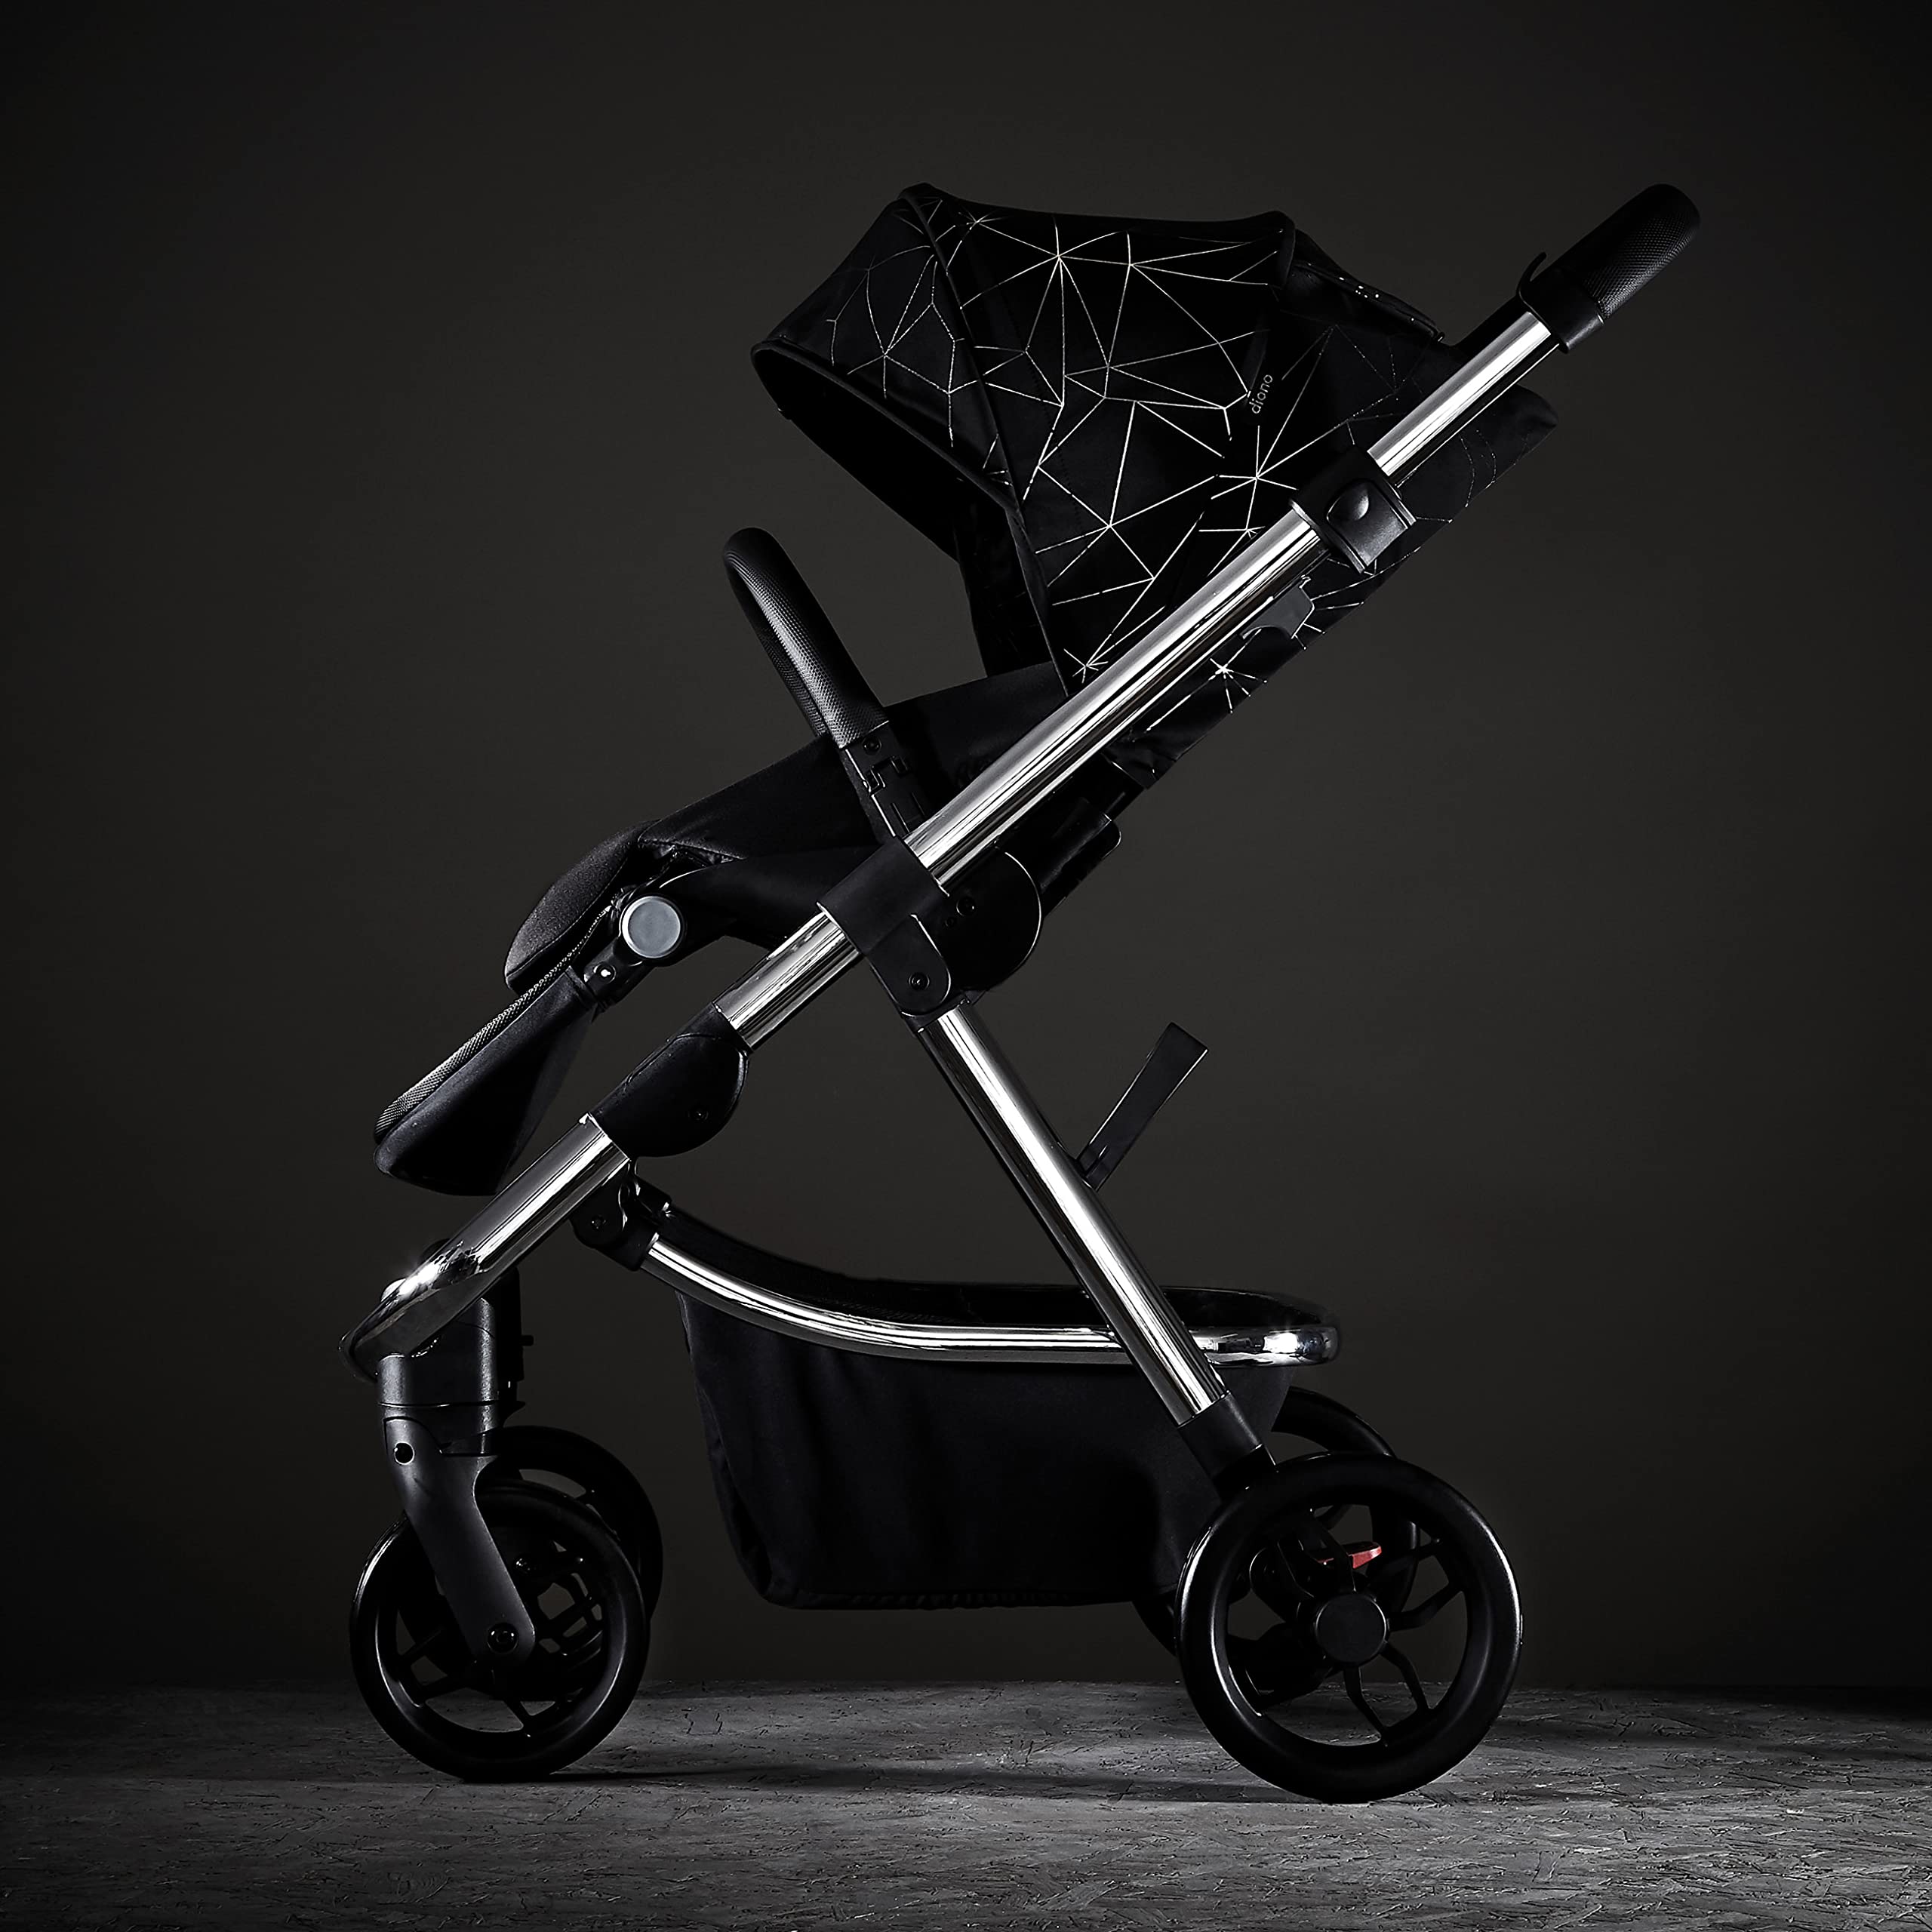 Diono Excurze Luxe Baby, Infant, Toddler Stroller, Perfect City Travel System Stroller and Car Seat Compatible, Adaptors Included Compact Fold, Narrow Ride, XL Storage Basket, Black Platinum